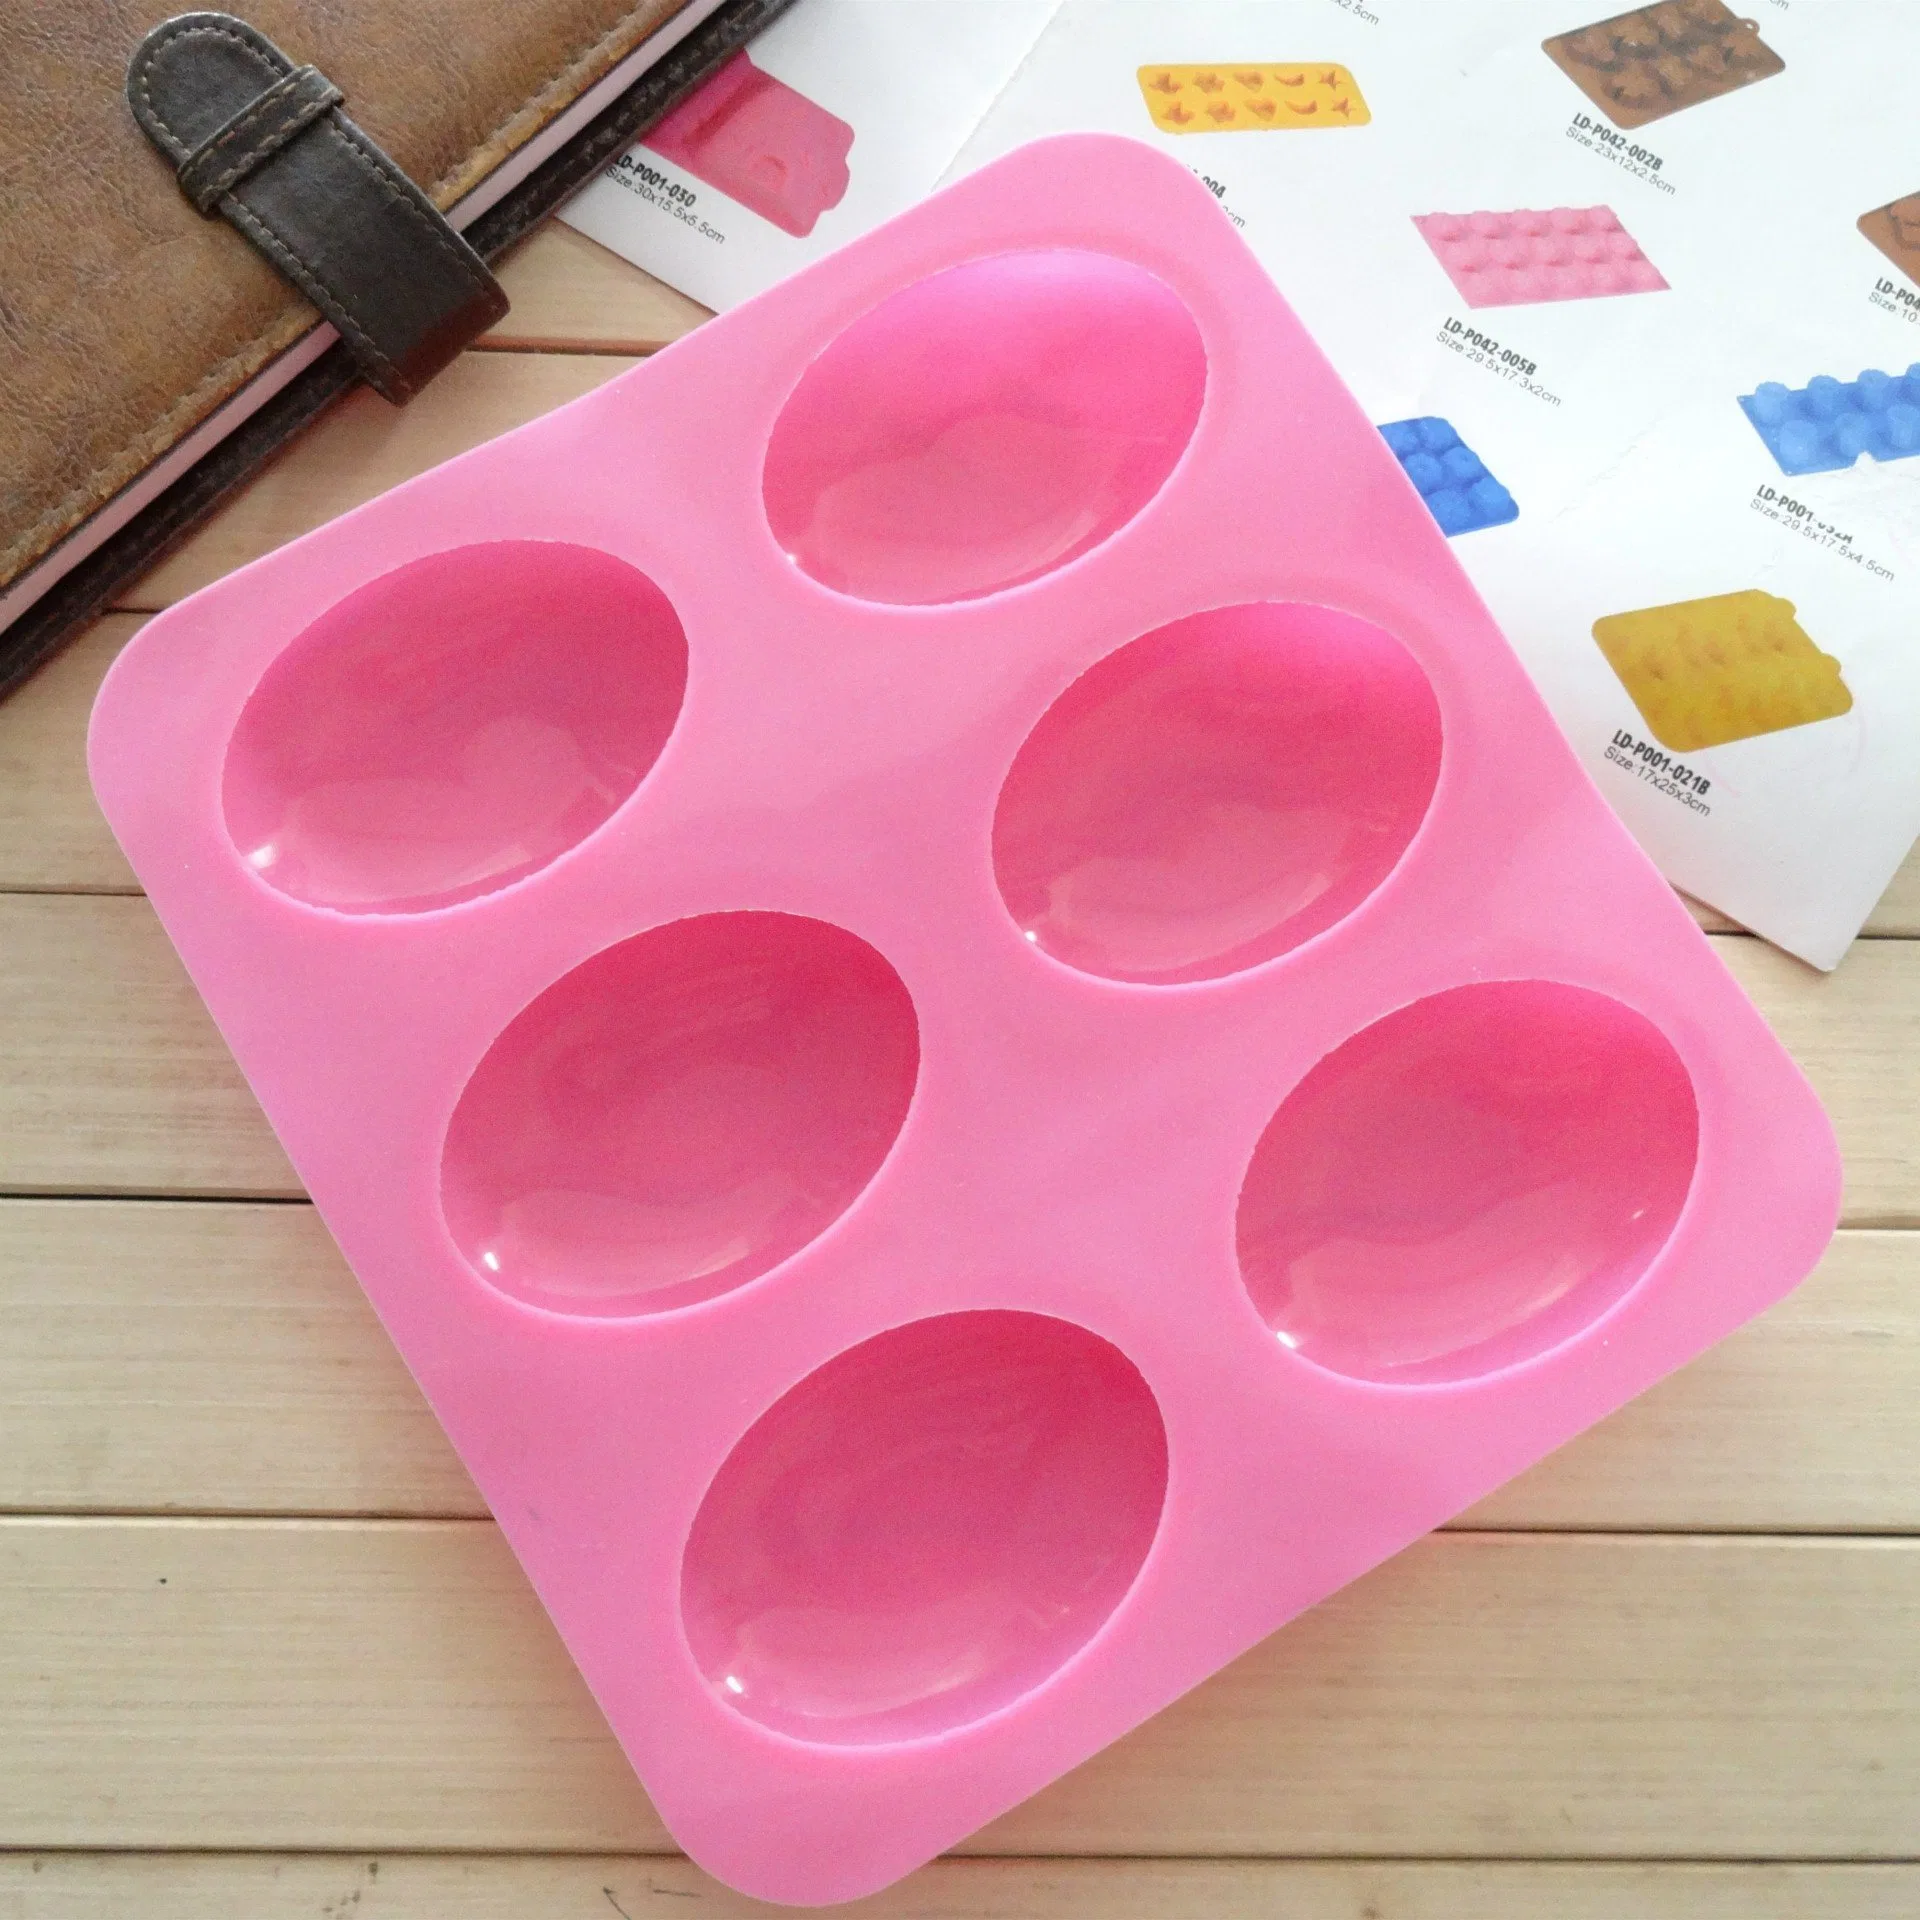 Cookie Maker Cake Mold Tool 6 Slots 3D Oval Shape Silicone Handmade Bl17890